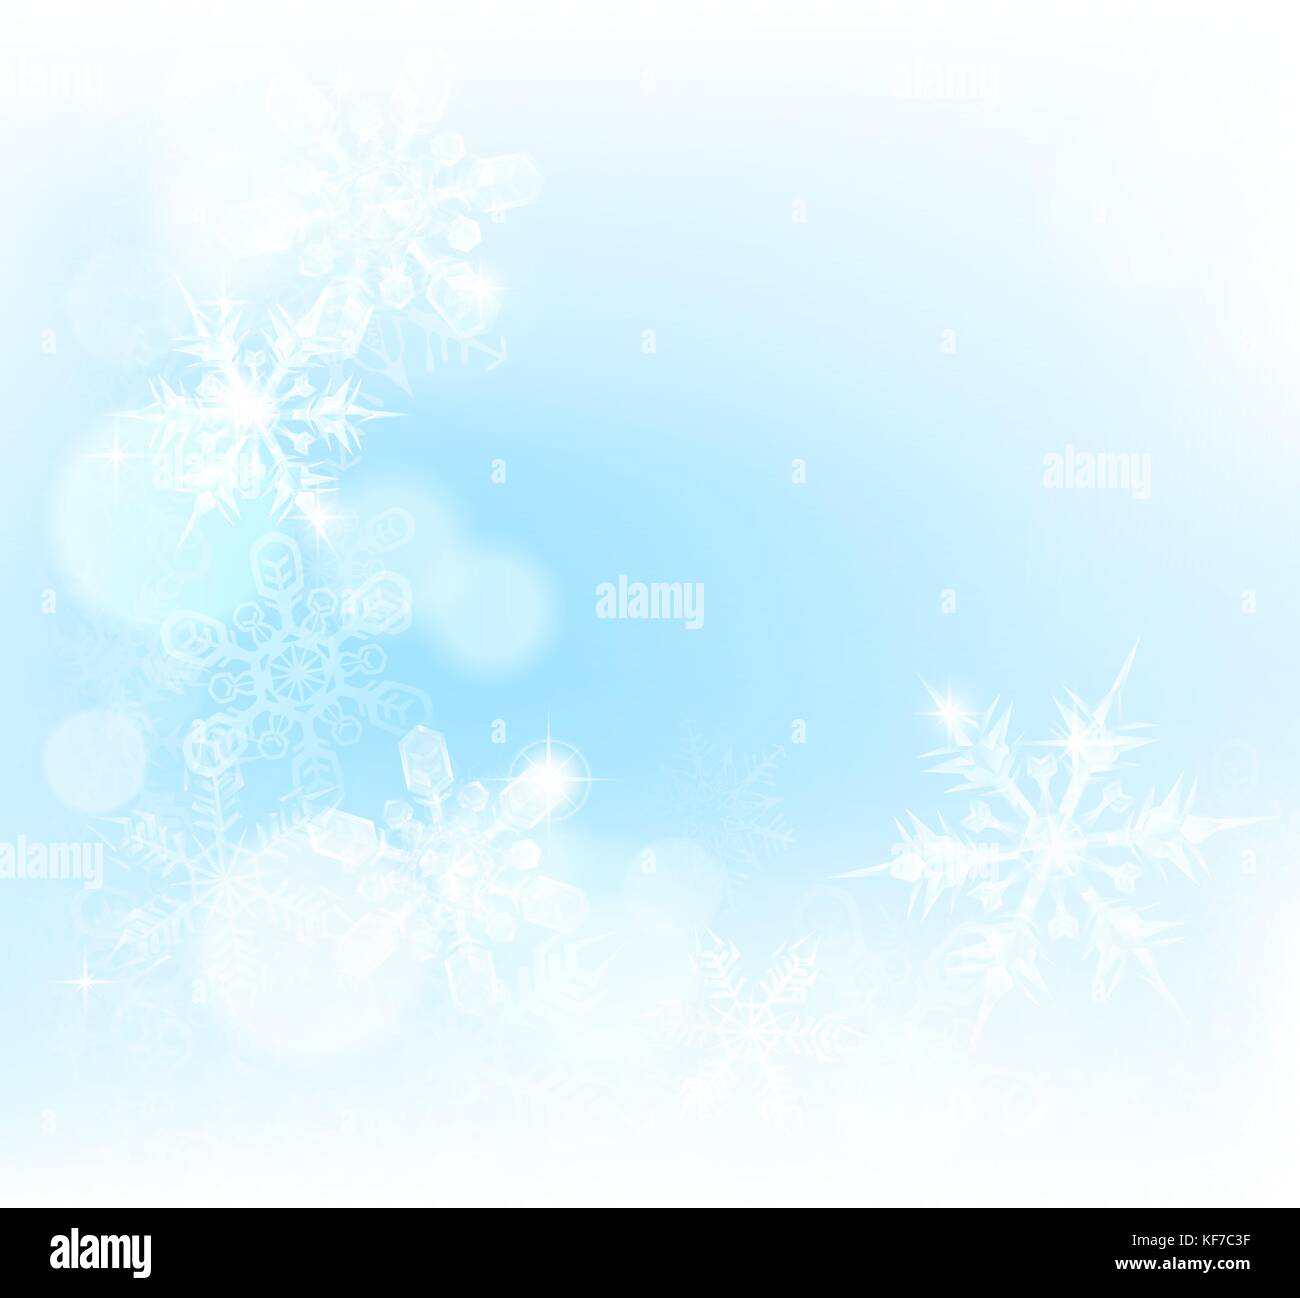 Christmas Snowflakes Background Stock Vector